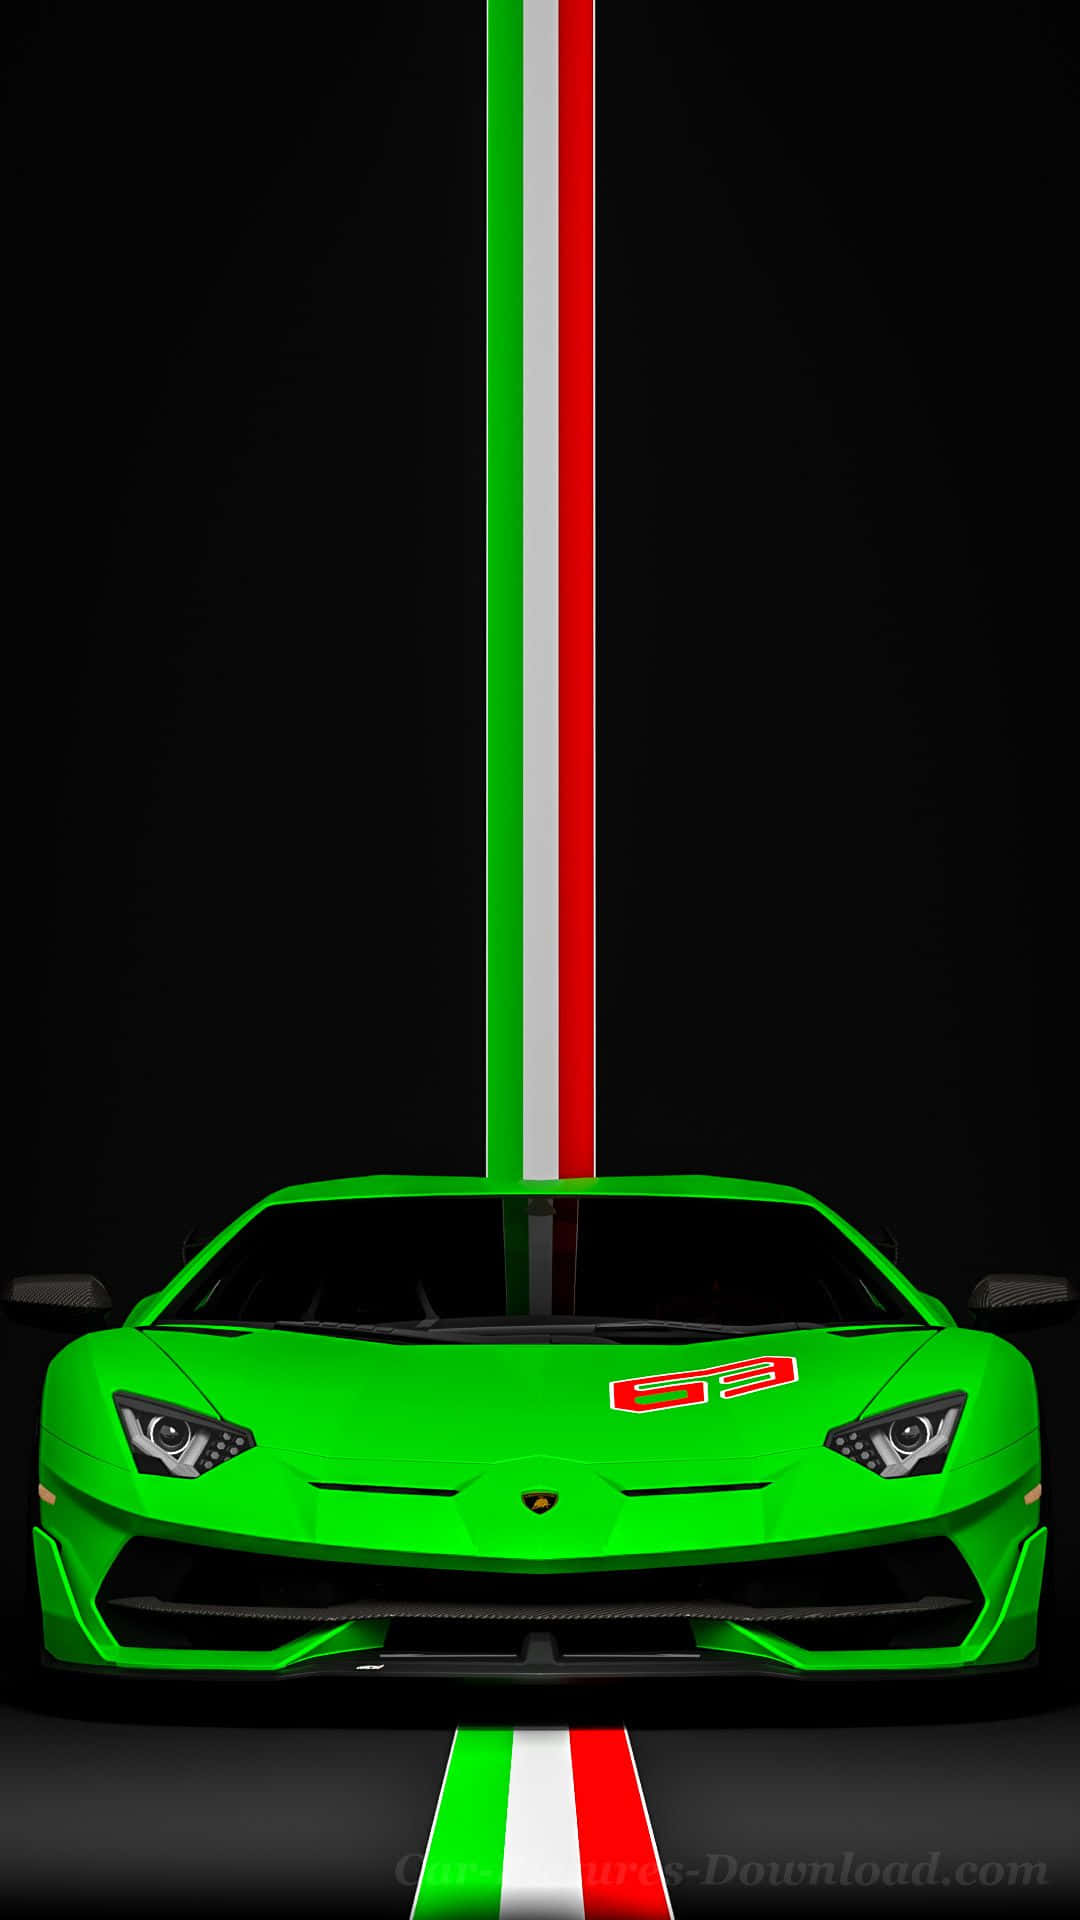 Upgrade your style with the Lamborghini Phone Wallpaper